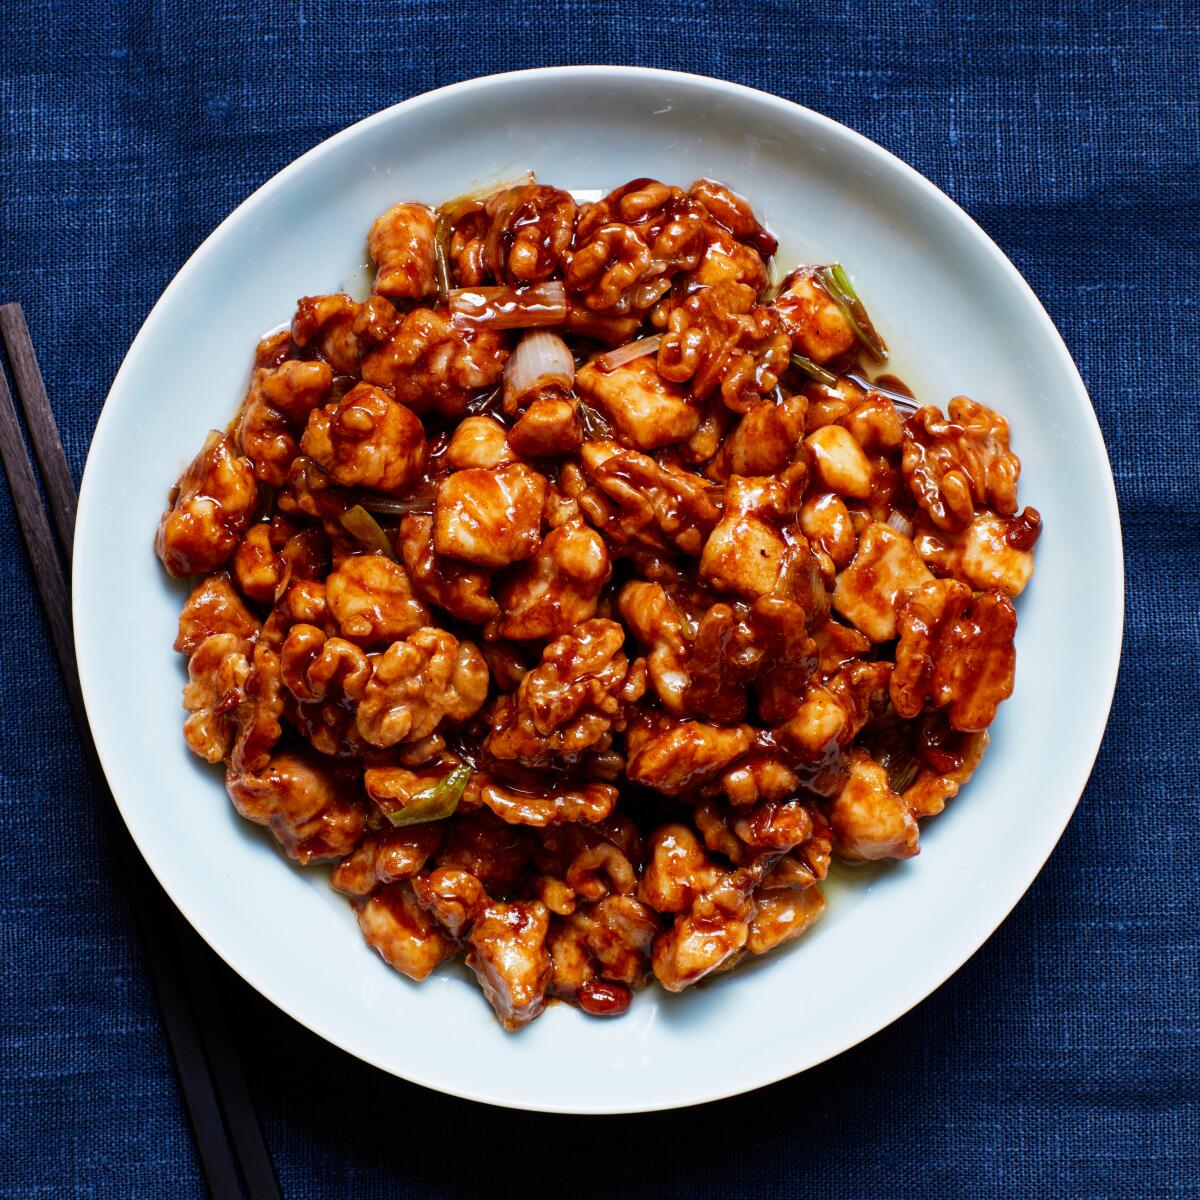 A salty-sweet fermented yellow bean paste sauce coats chicken and walnuts.